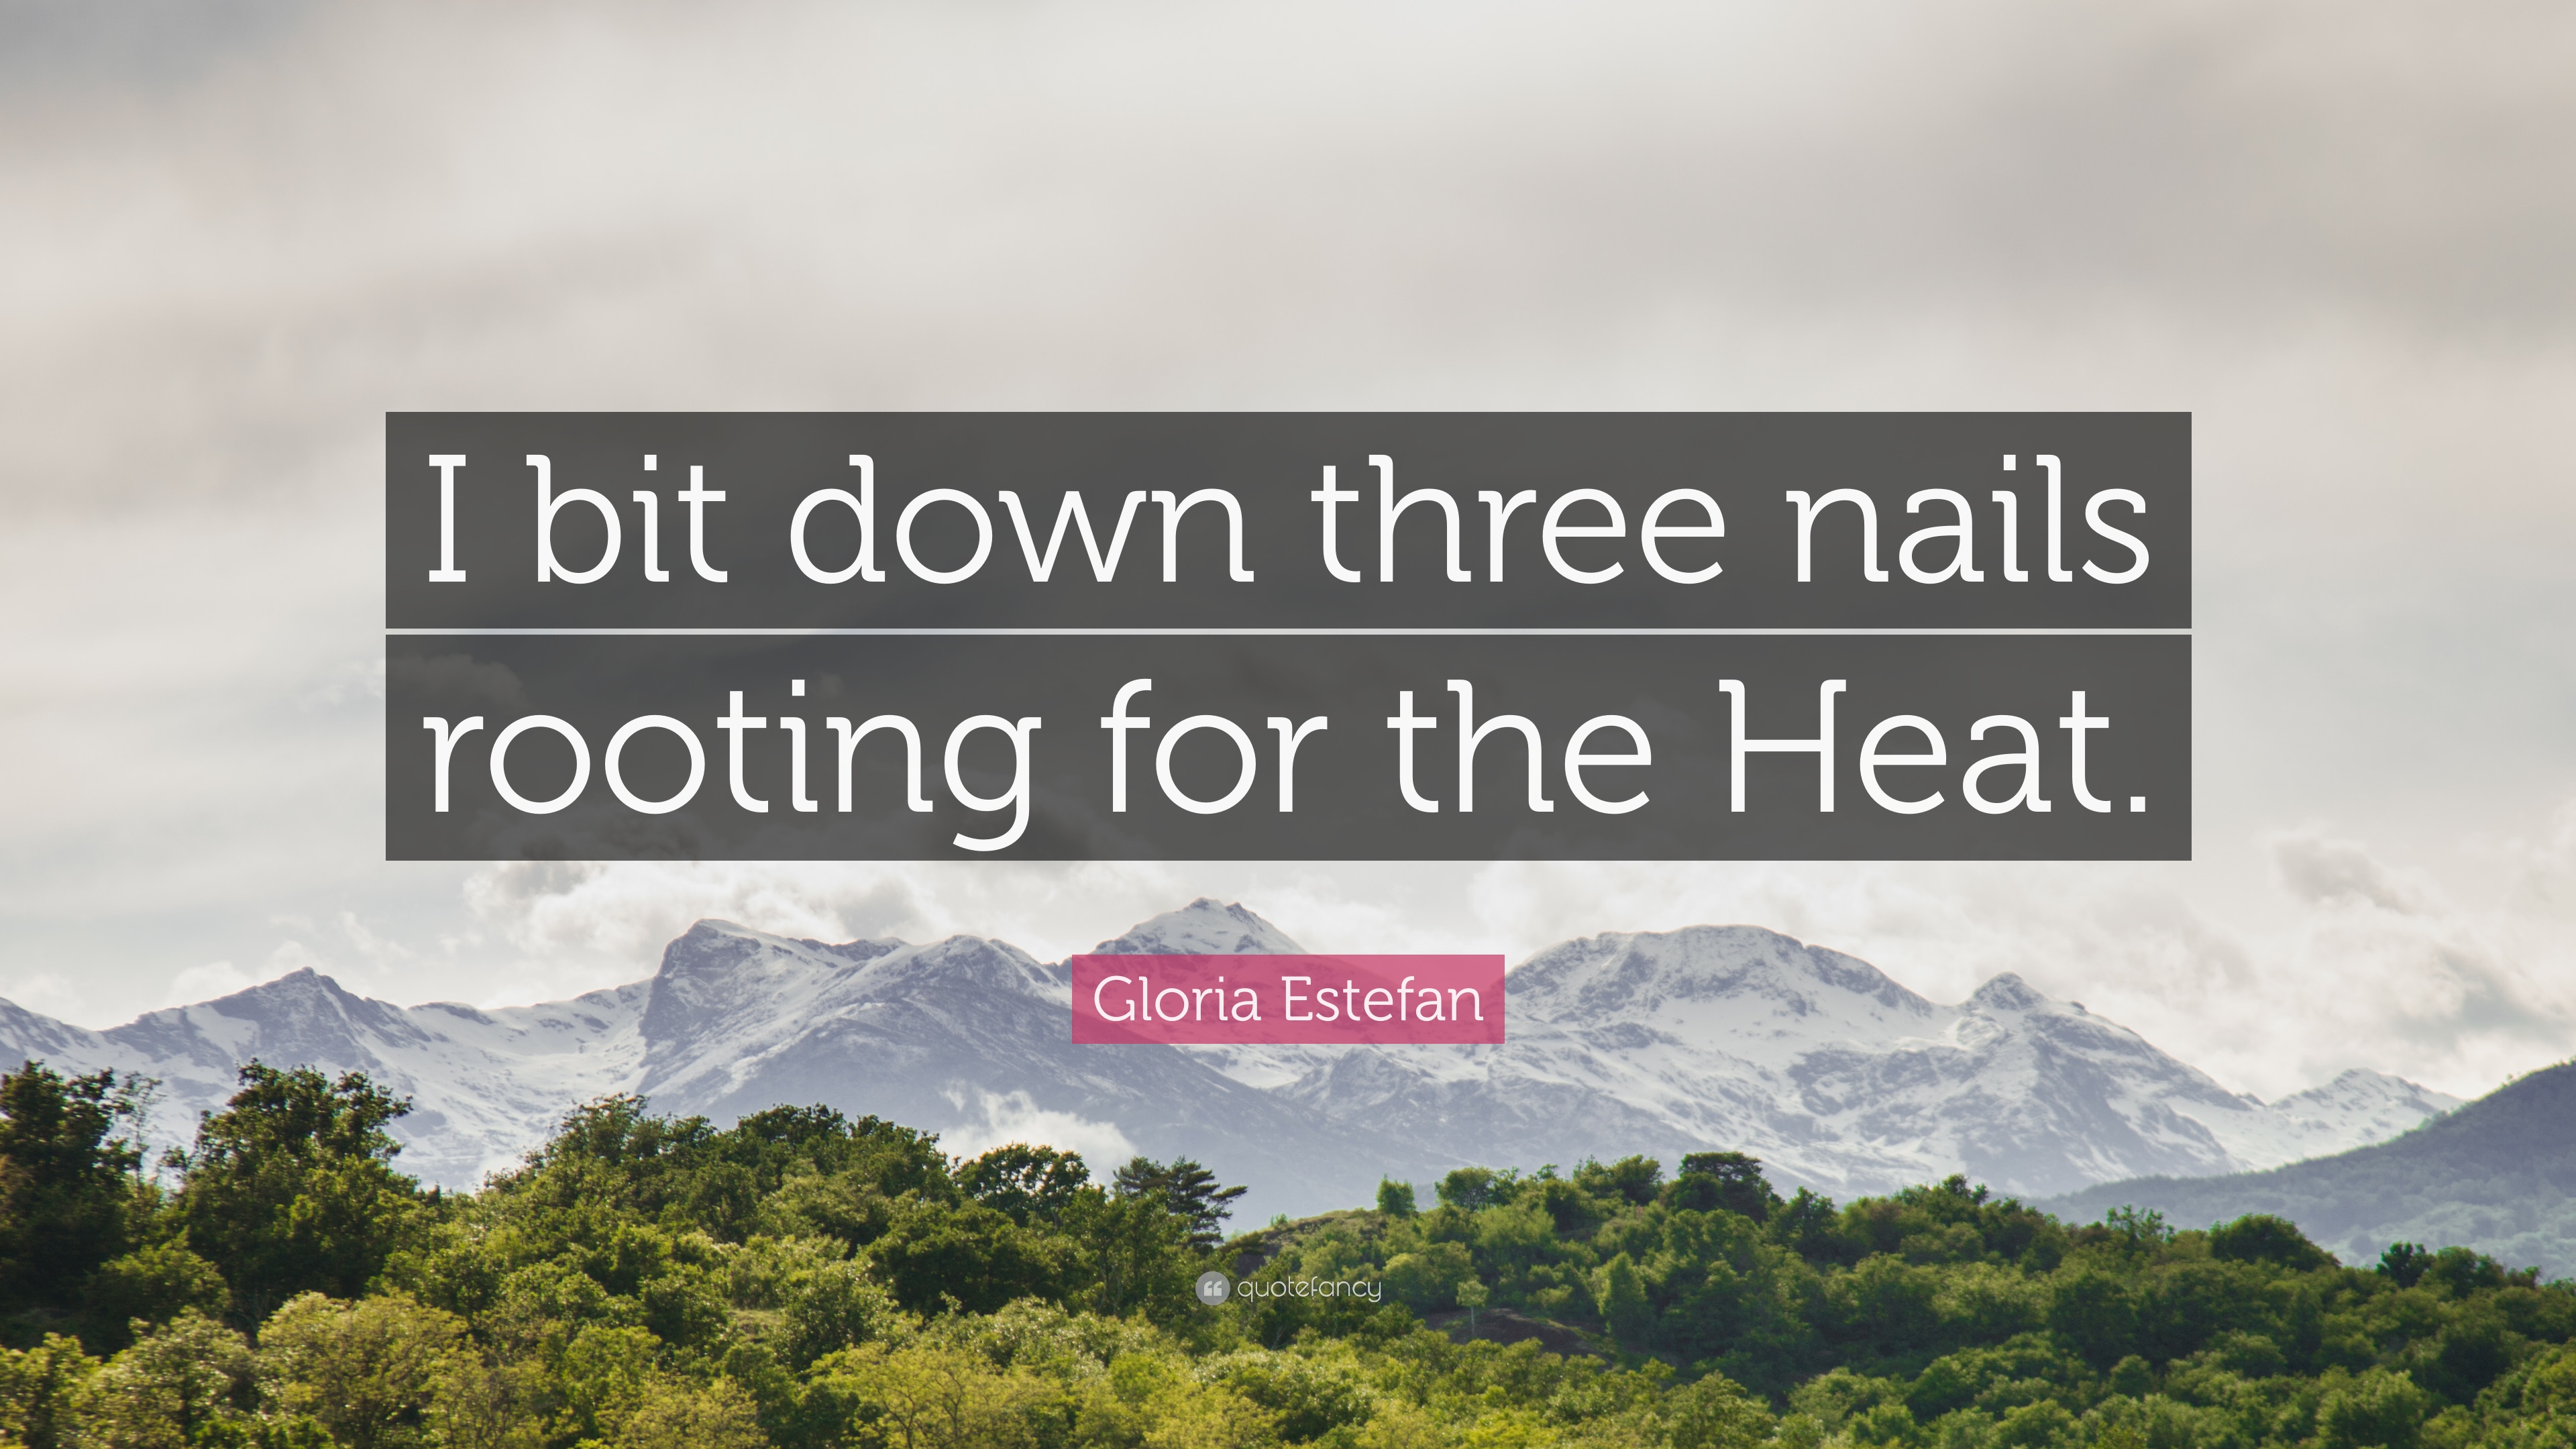 Gloria Estefan Quote: “I bit down three nails rooting for the Heat